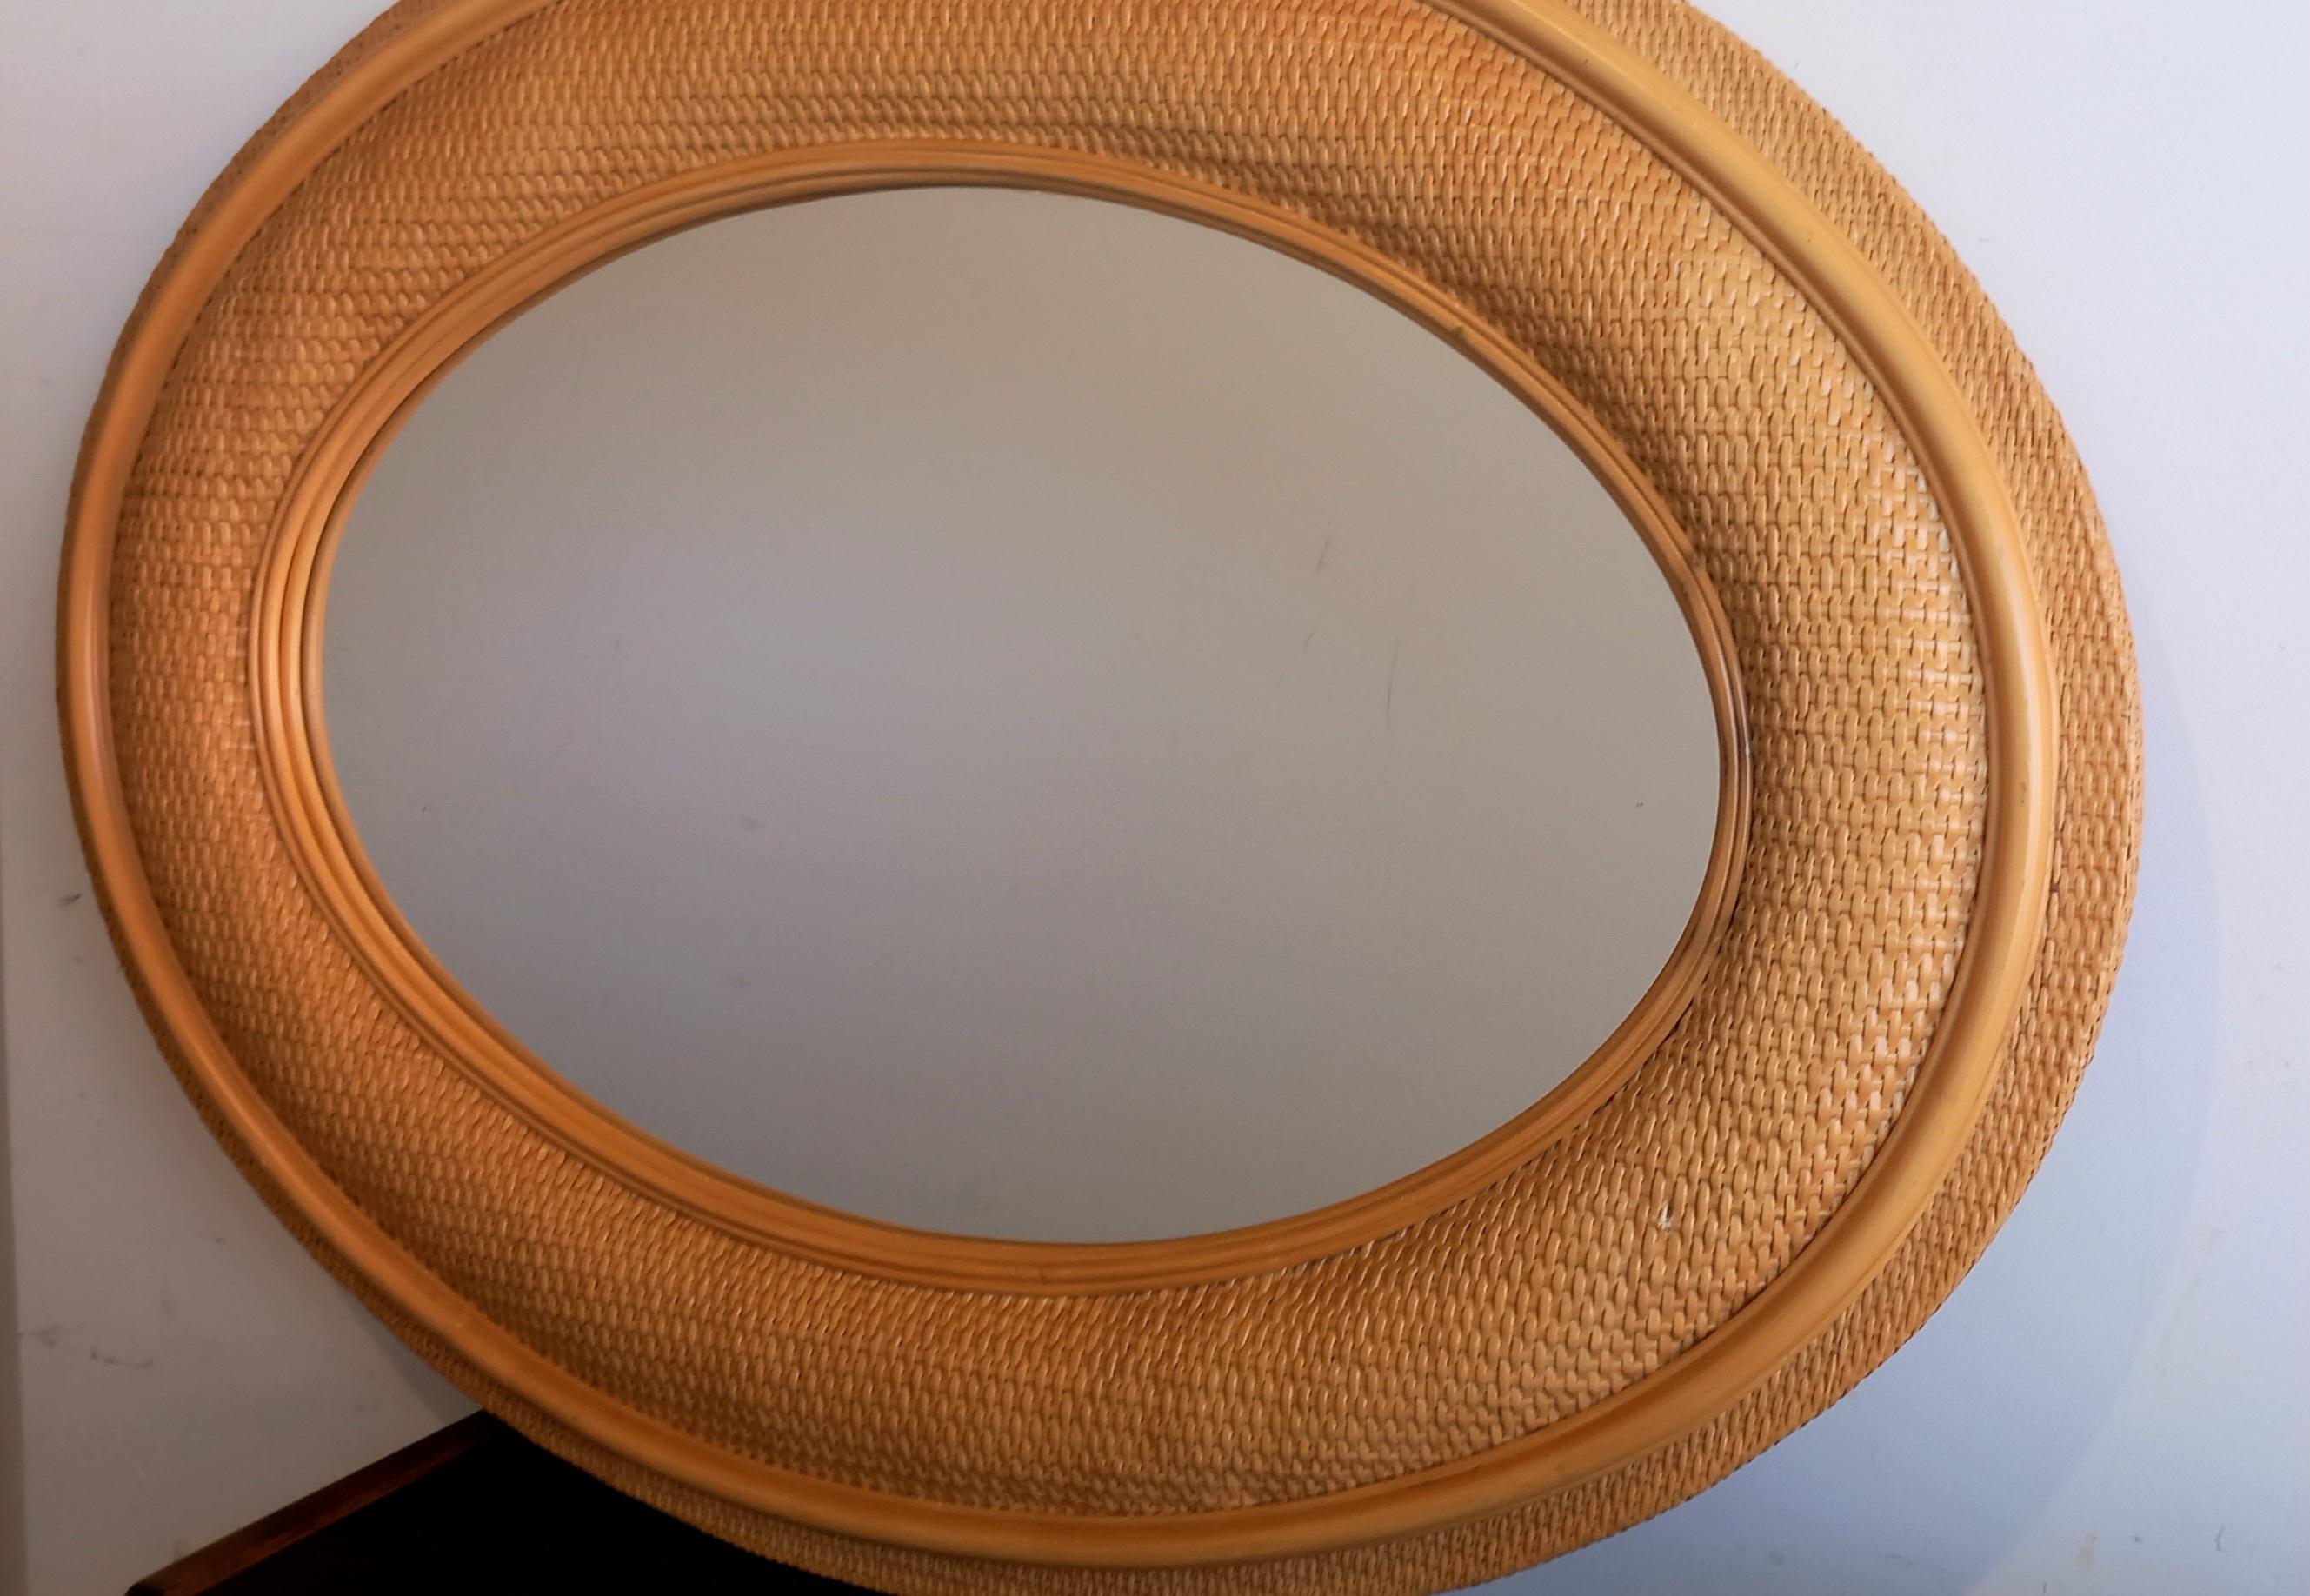 Mirrors Rattan Rare Extra Large Oval  Mid-20th  Century  Vertical or Horizontal  For Sale 9